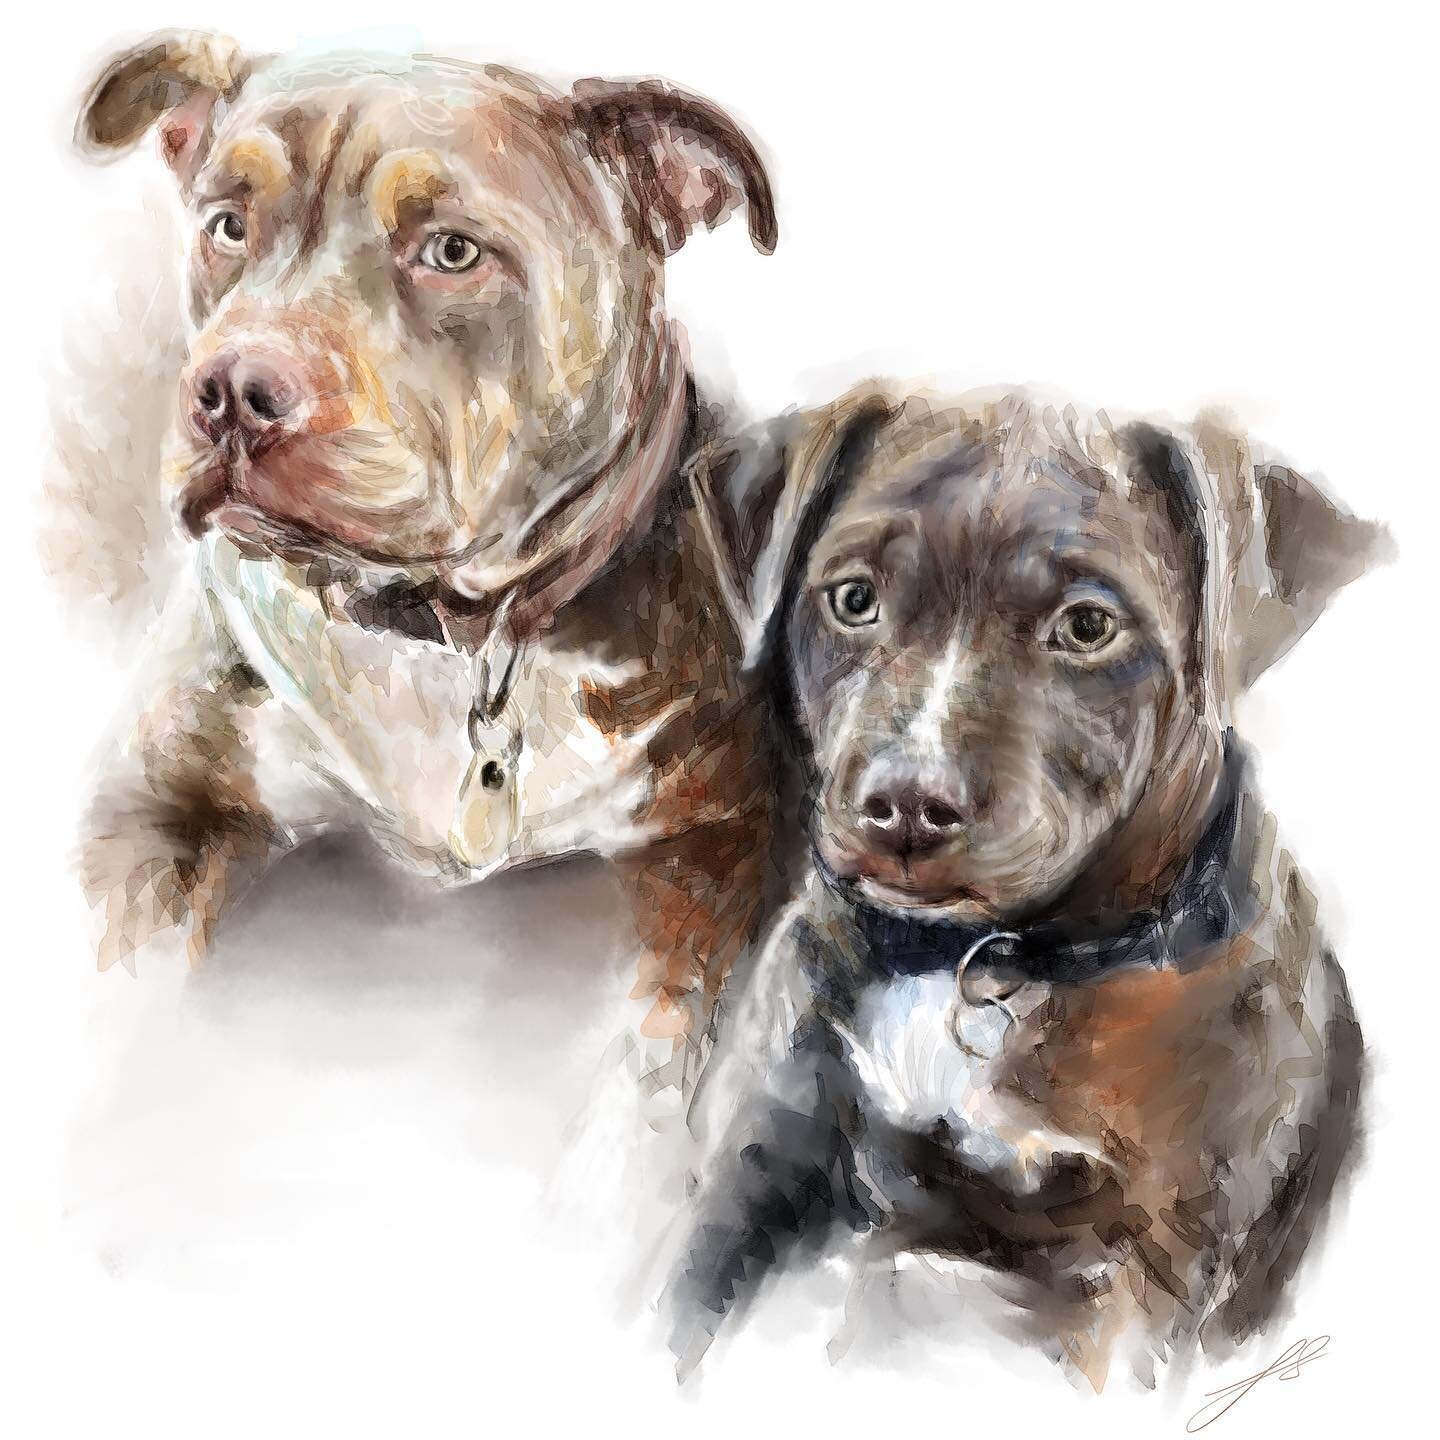 Lots going on here at Arty JRS! 

On the to do list there&rsquo;s been wedding stationery, wrapping paper designs, pet commissions and, when I can, some more of these gorgeous XL bully portraits. 

This design, along with many other dogs are all avai